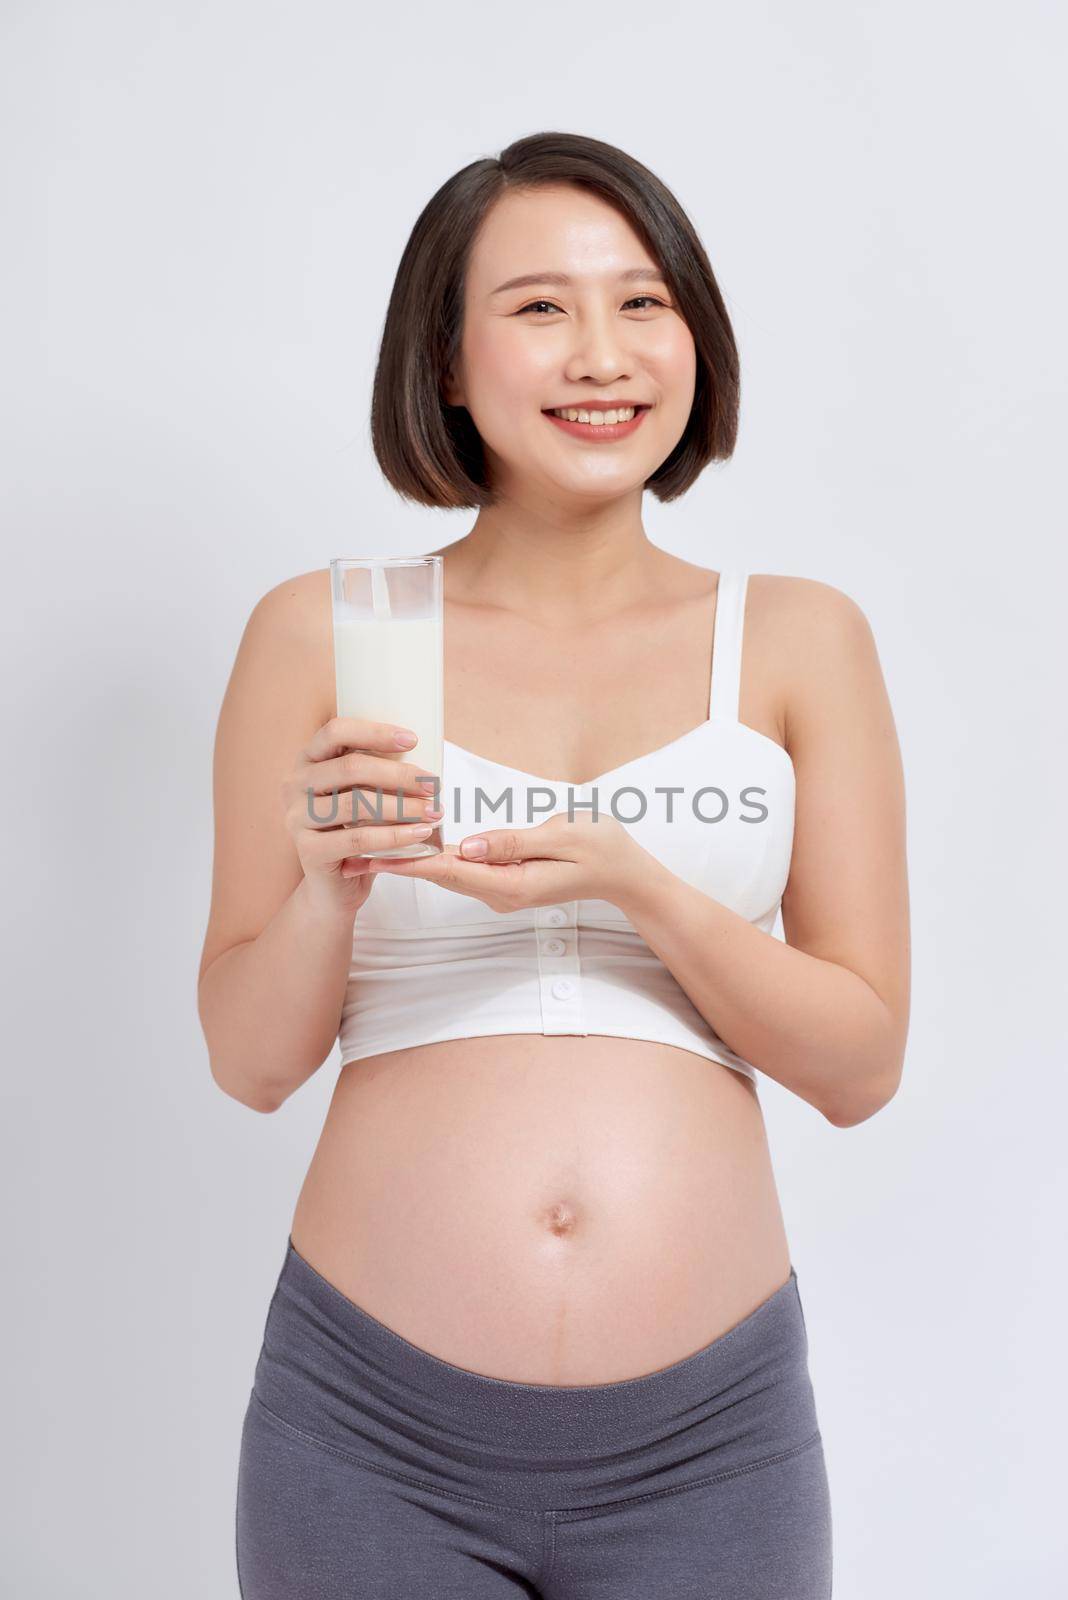 Pregnant woman drinking milk on the white background. by makidotvn